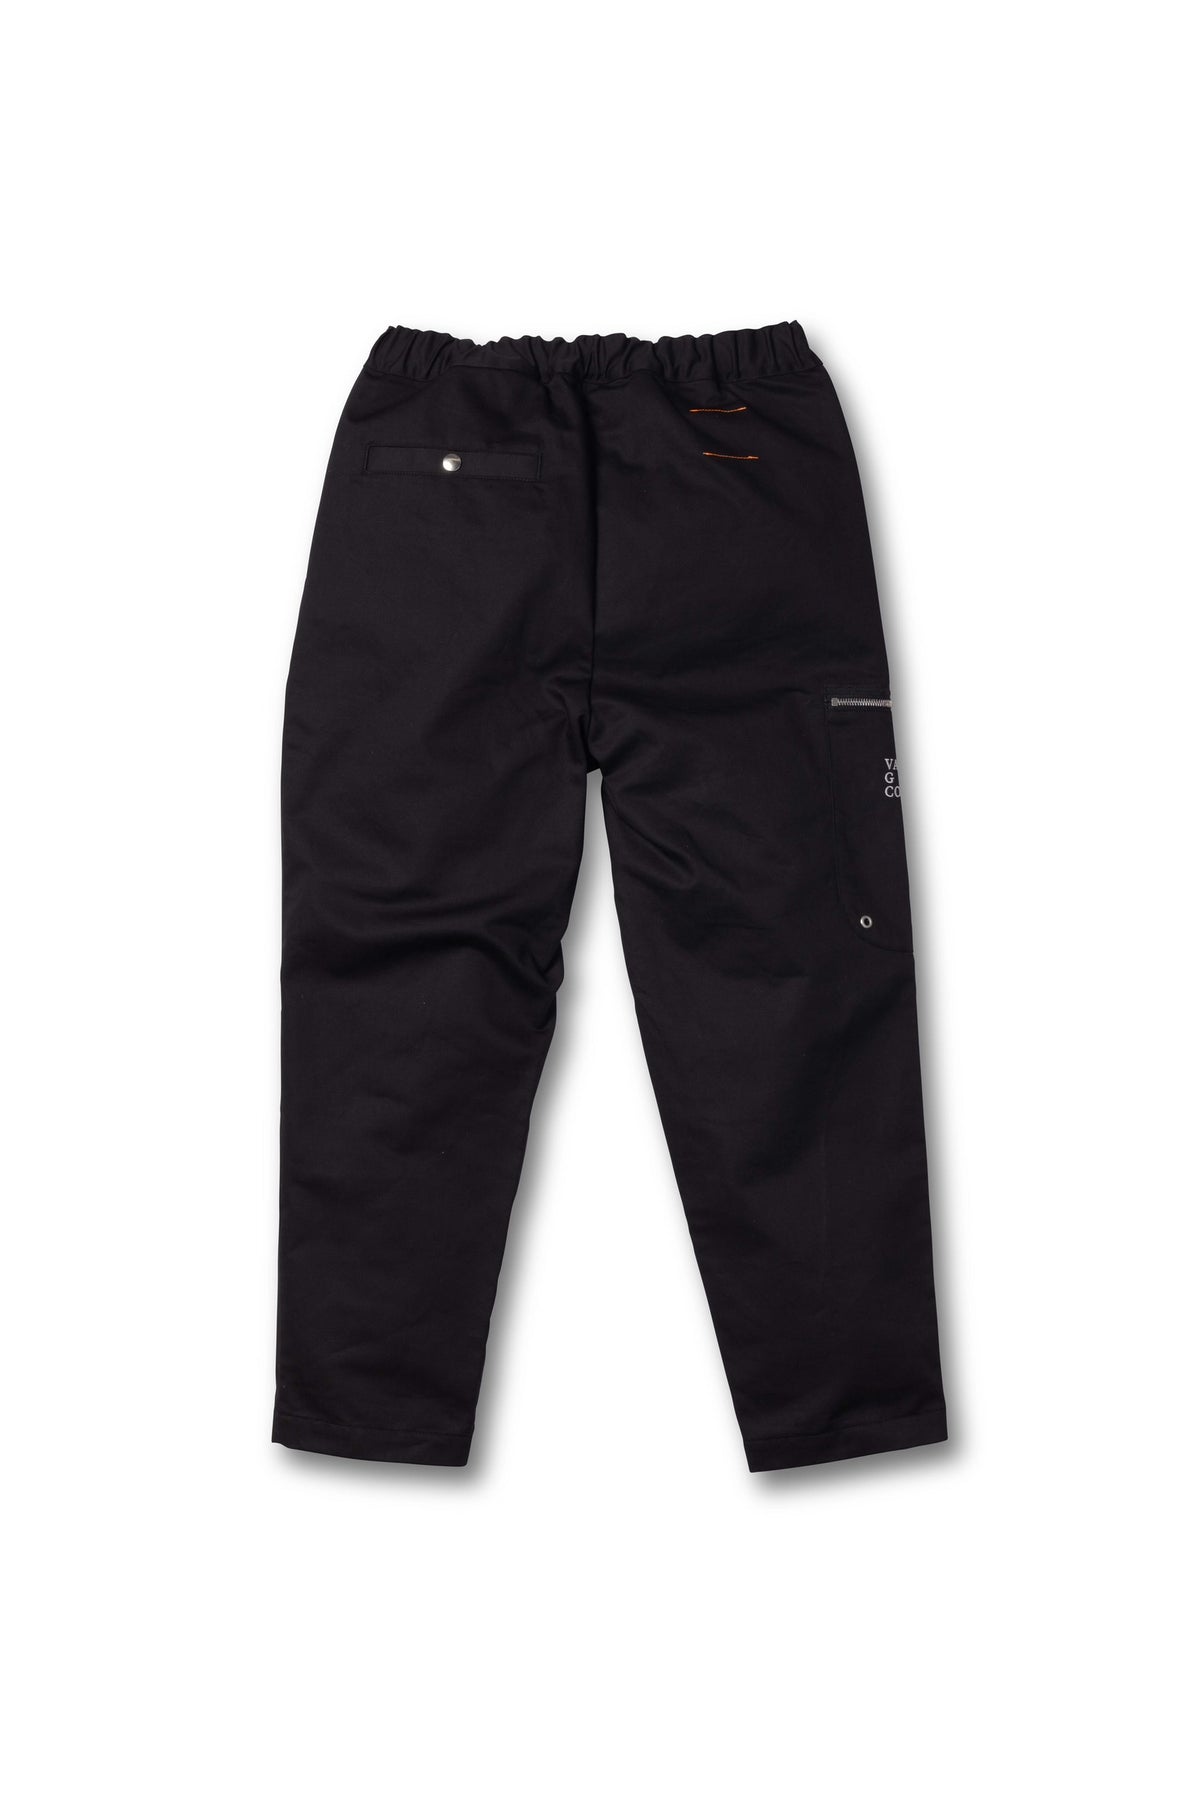 VGC CROPPED TROUSERS